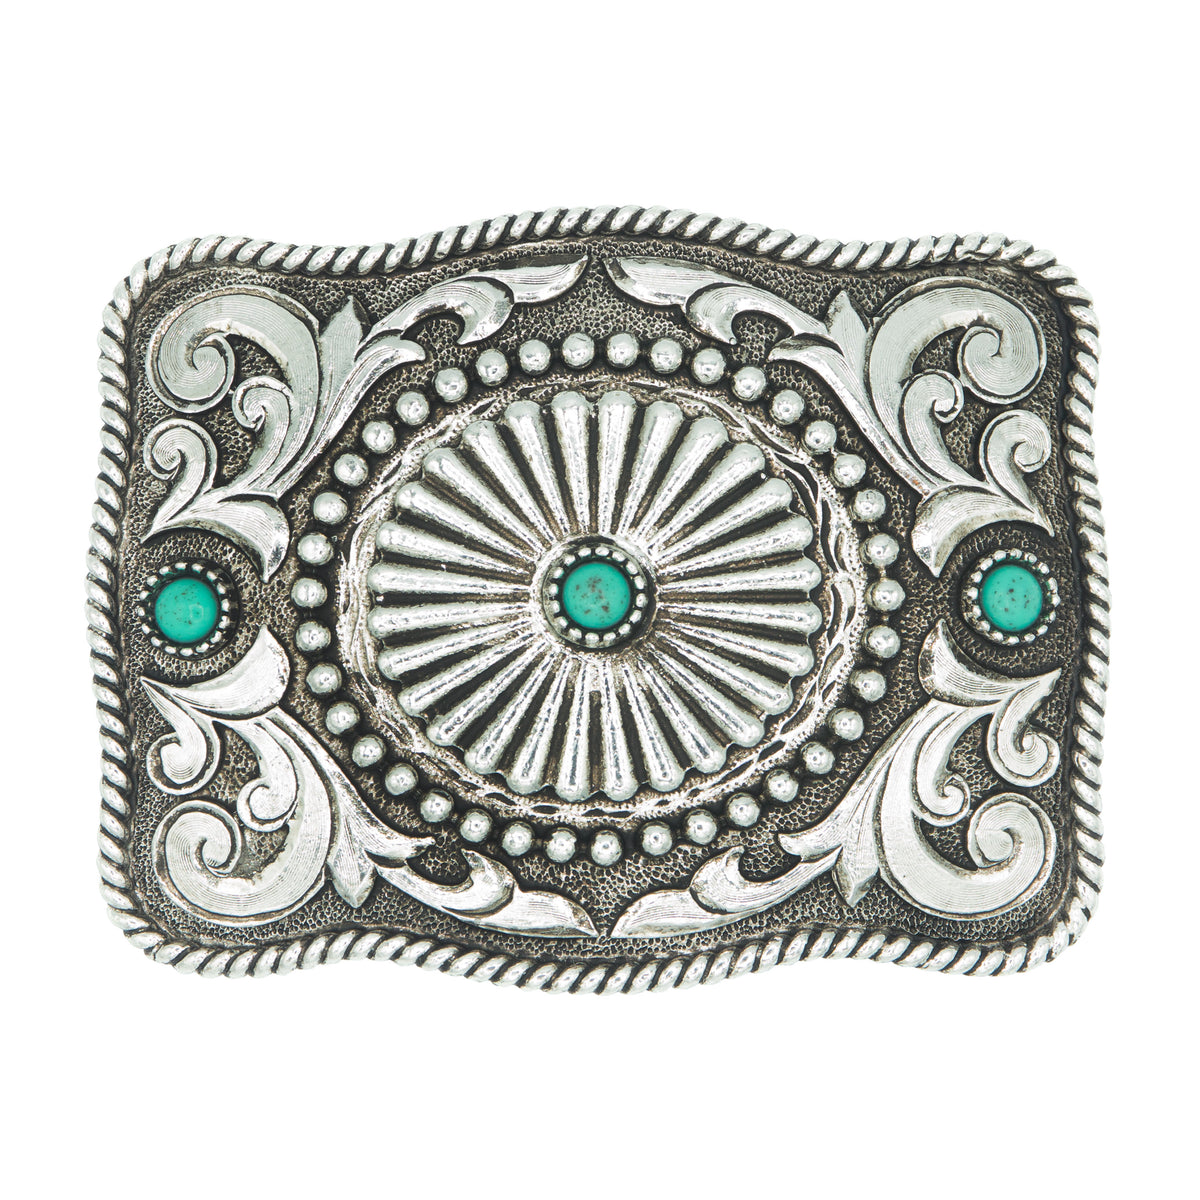 Concho with Turquoise Accents Buckle